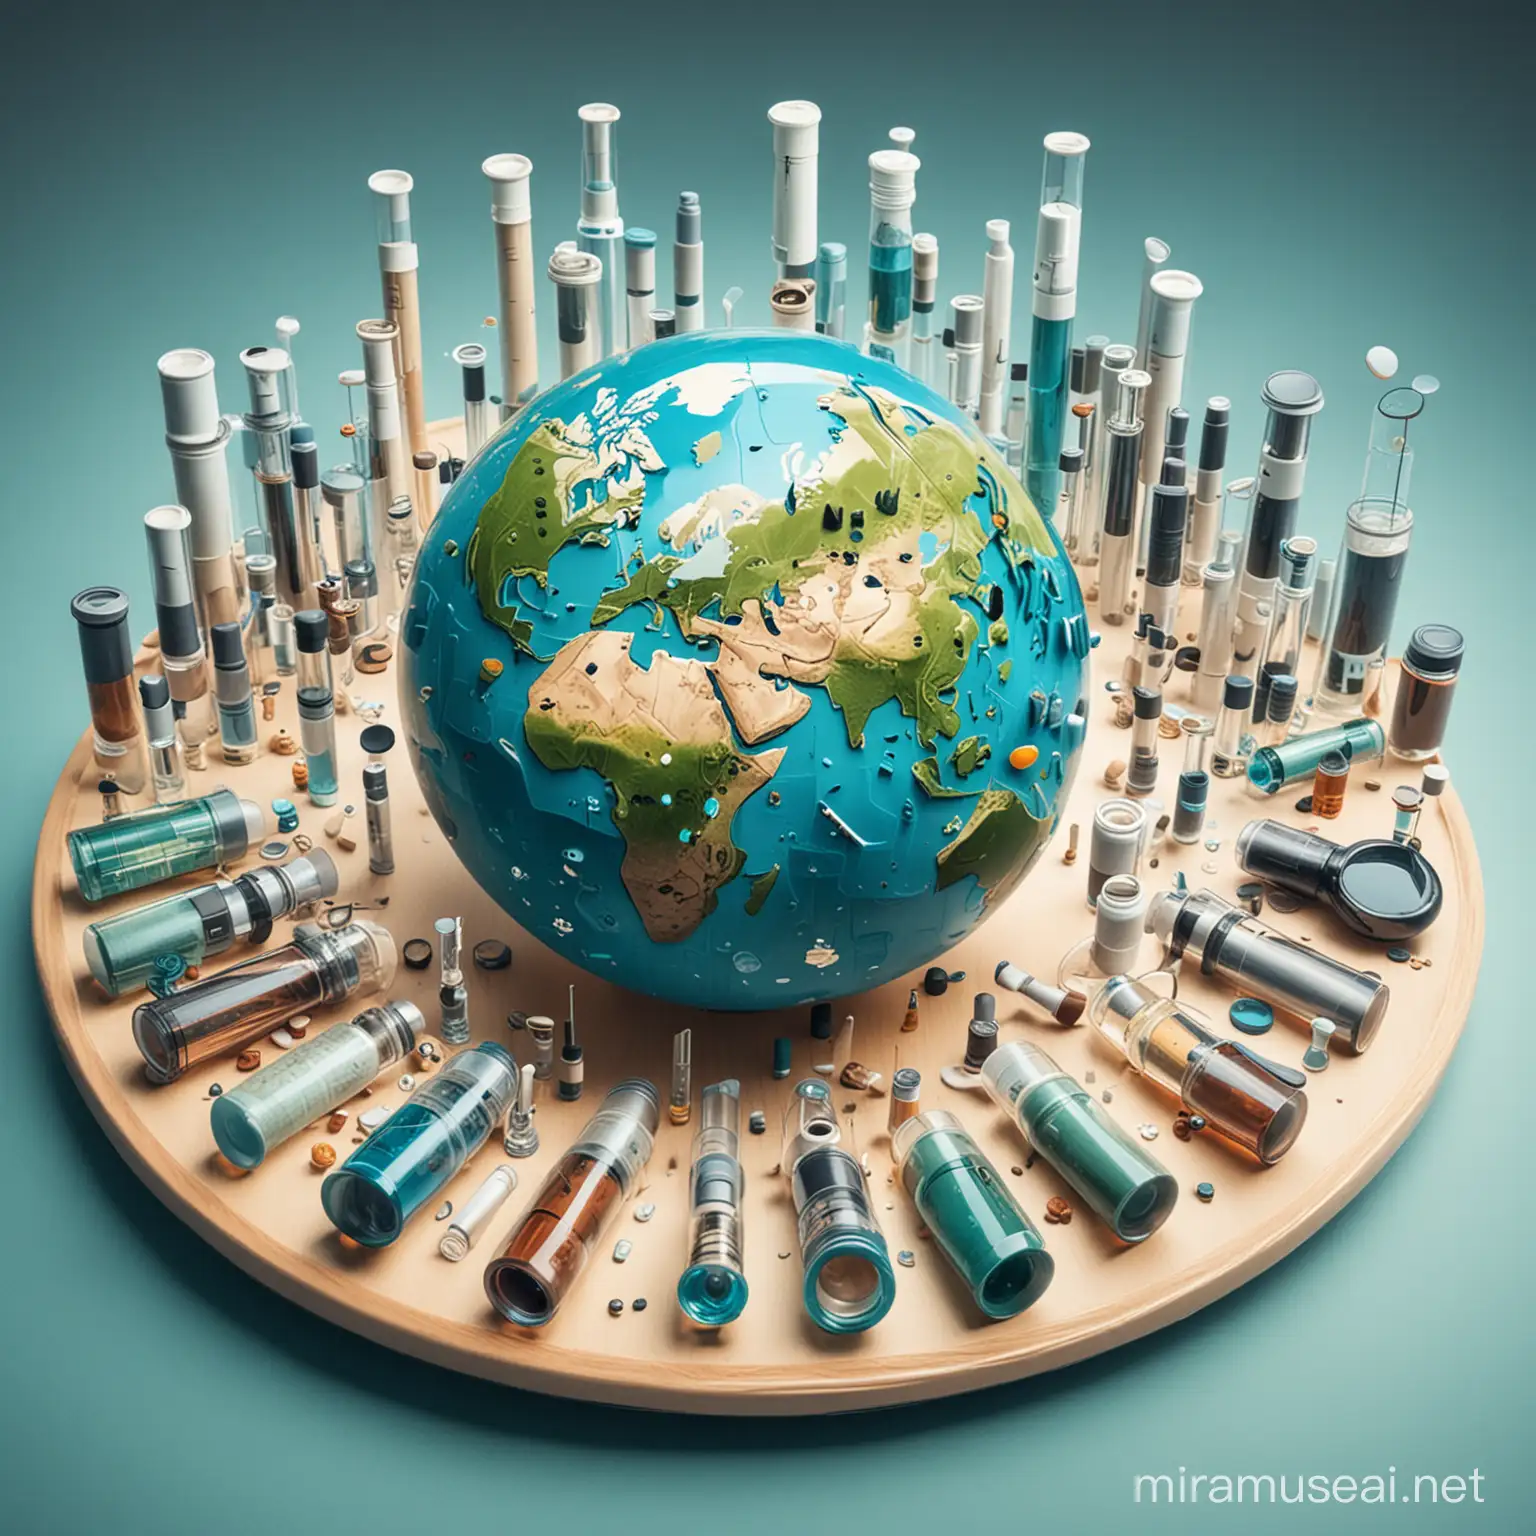 Planet Earth, surrounded by test tubes, plates, microscopes, cartoon style